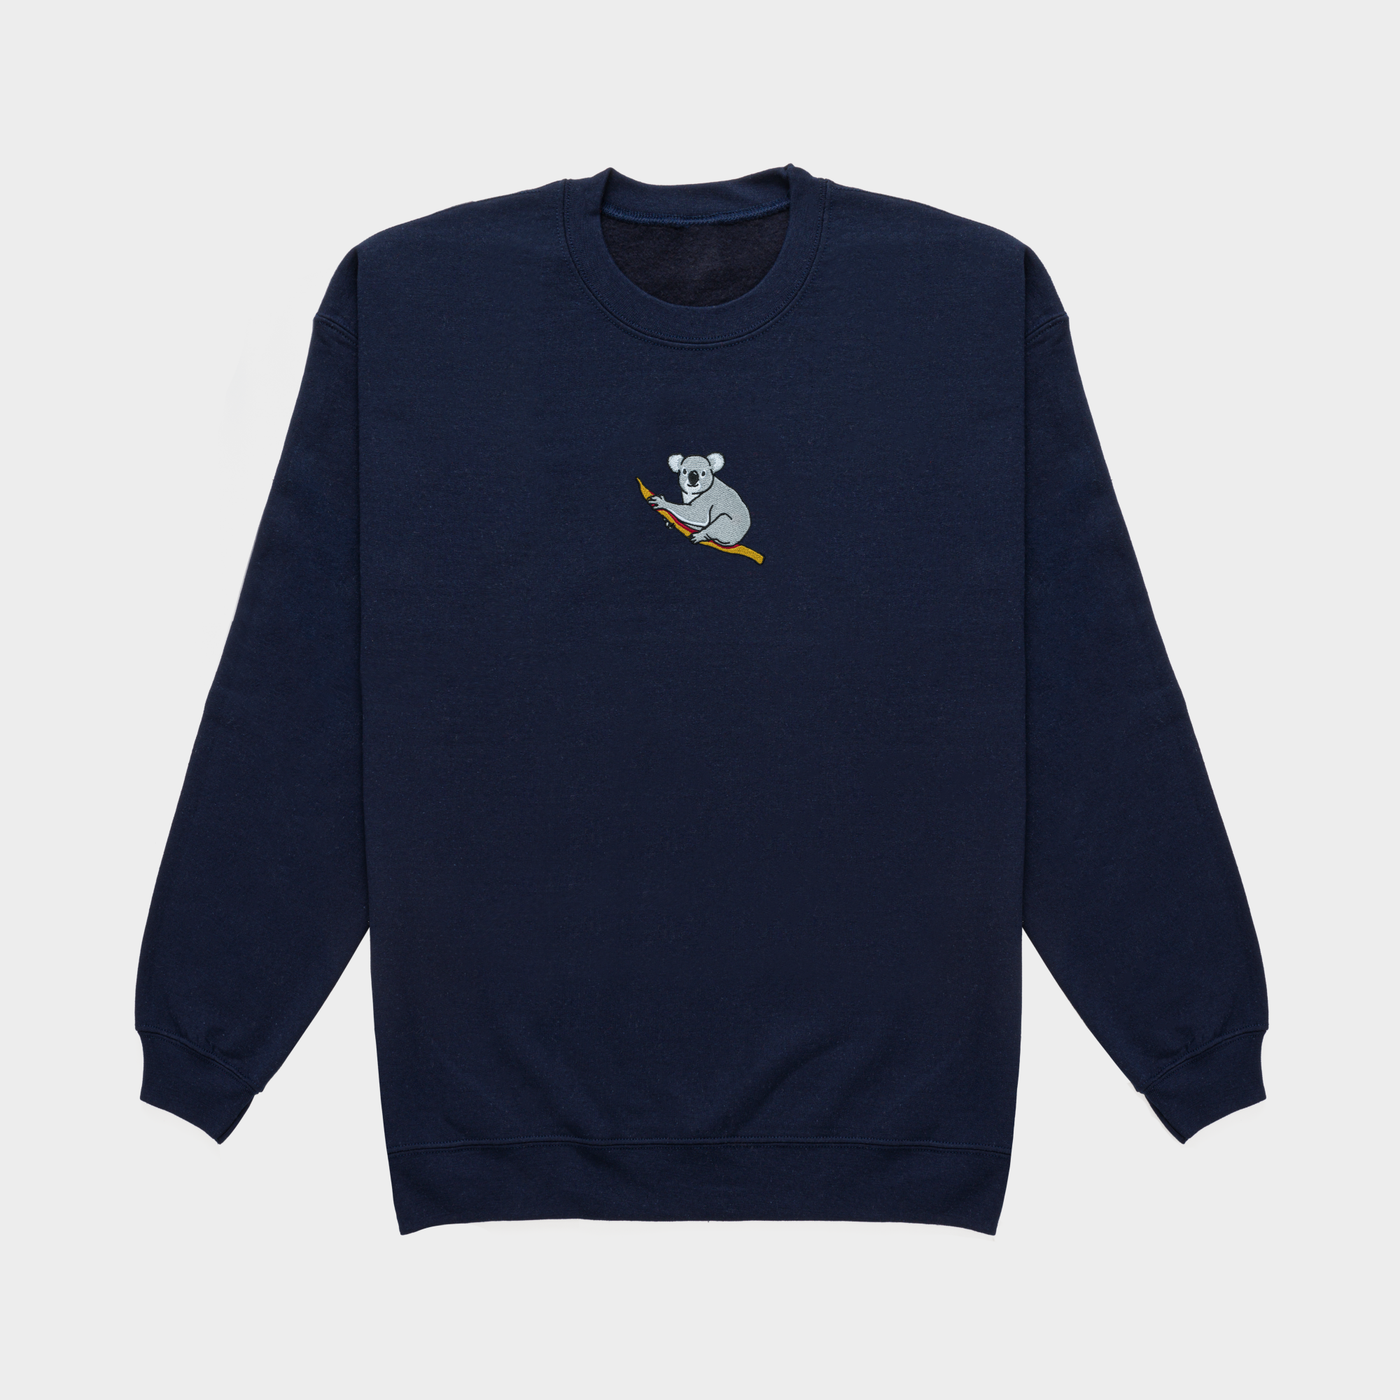 Bobby's Planet Men's Embroidered Koala Sweatshirt from Australia Down Under Animals Collection in Navy Color#color_navy